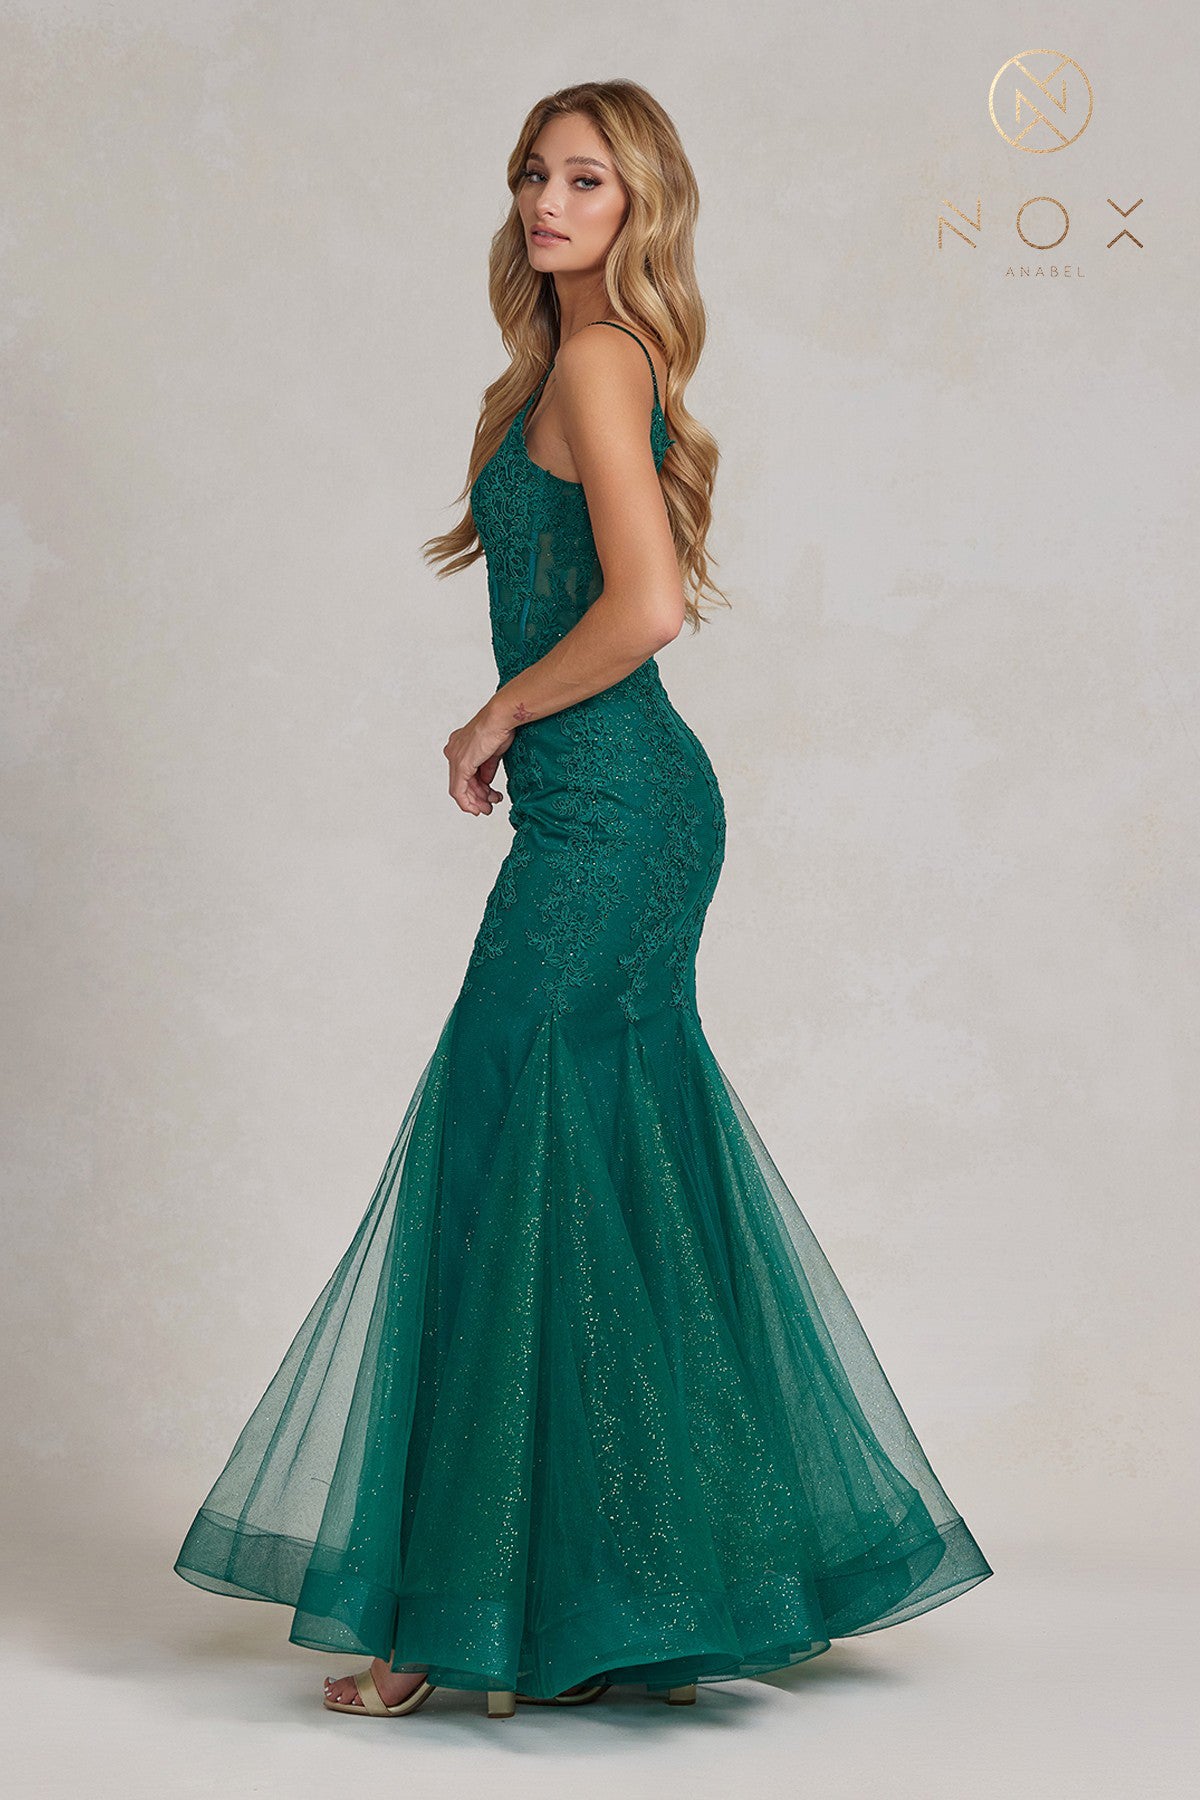 Embroidered Mermaid Dress By Nox Anabel -P1170